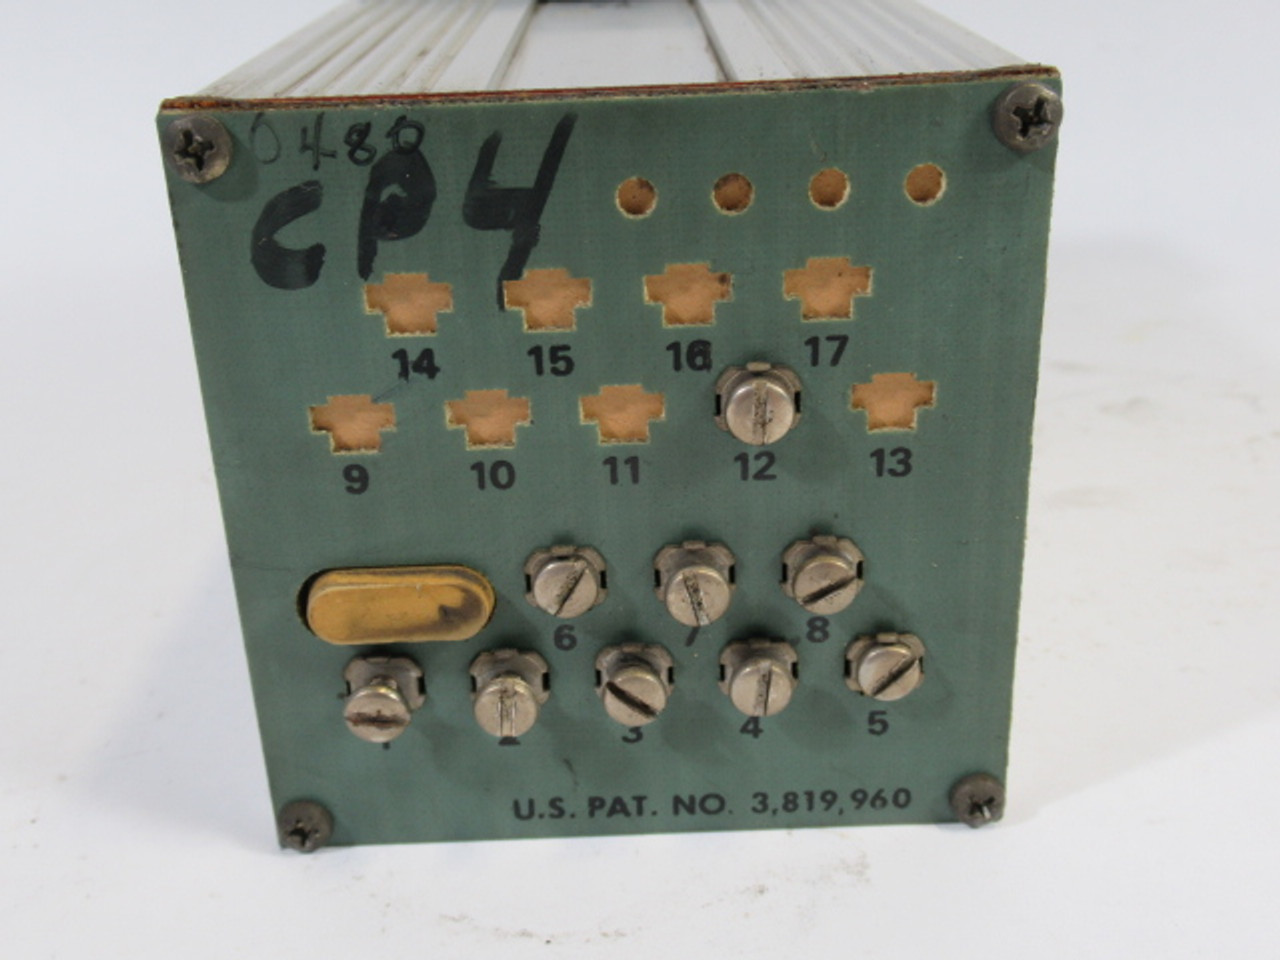 Love Controls Model 49 Proportional Control w/Indicator Light 0-1600KF USED